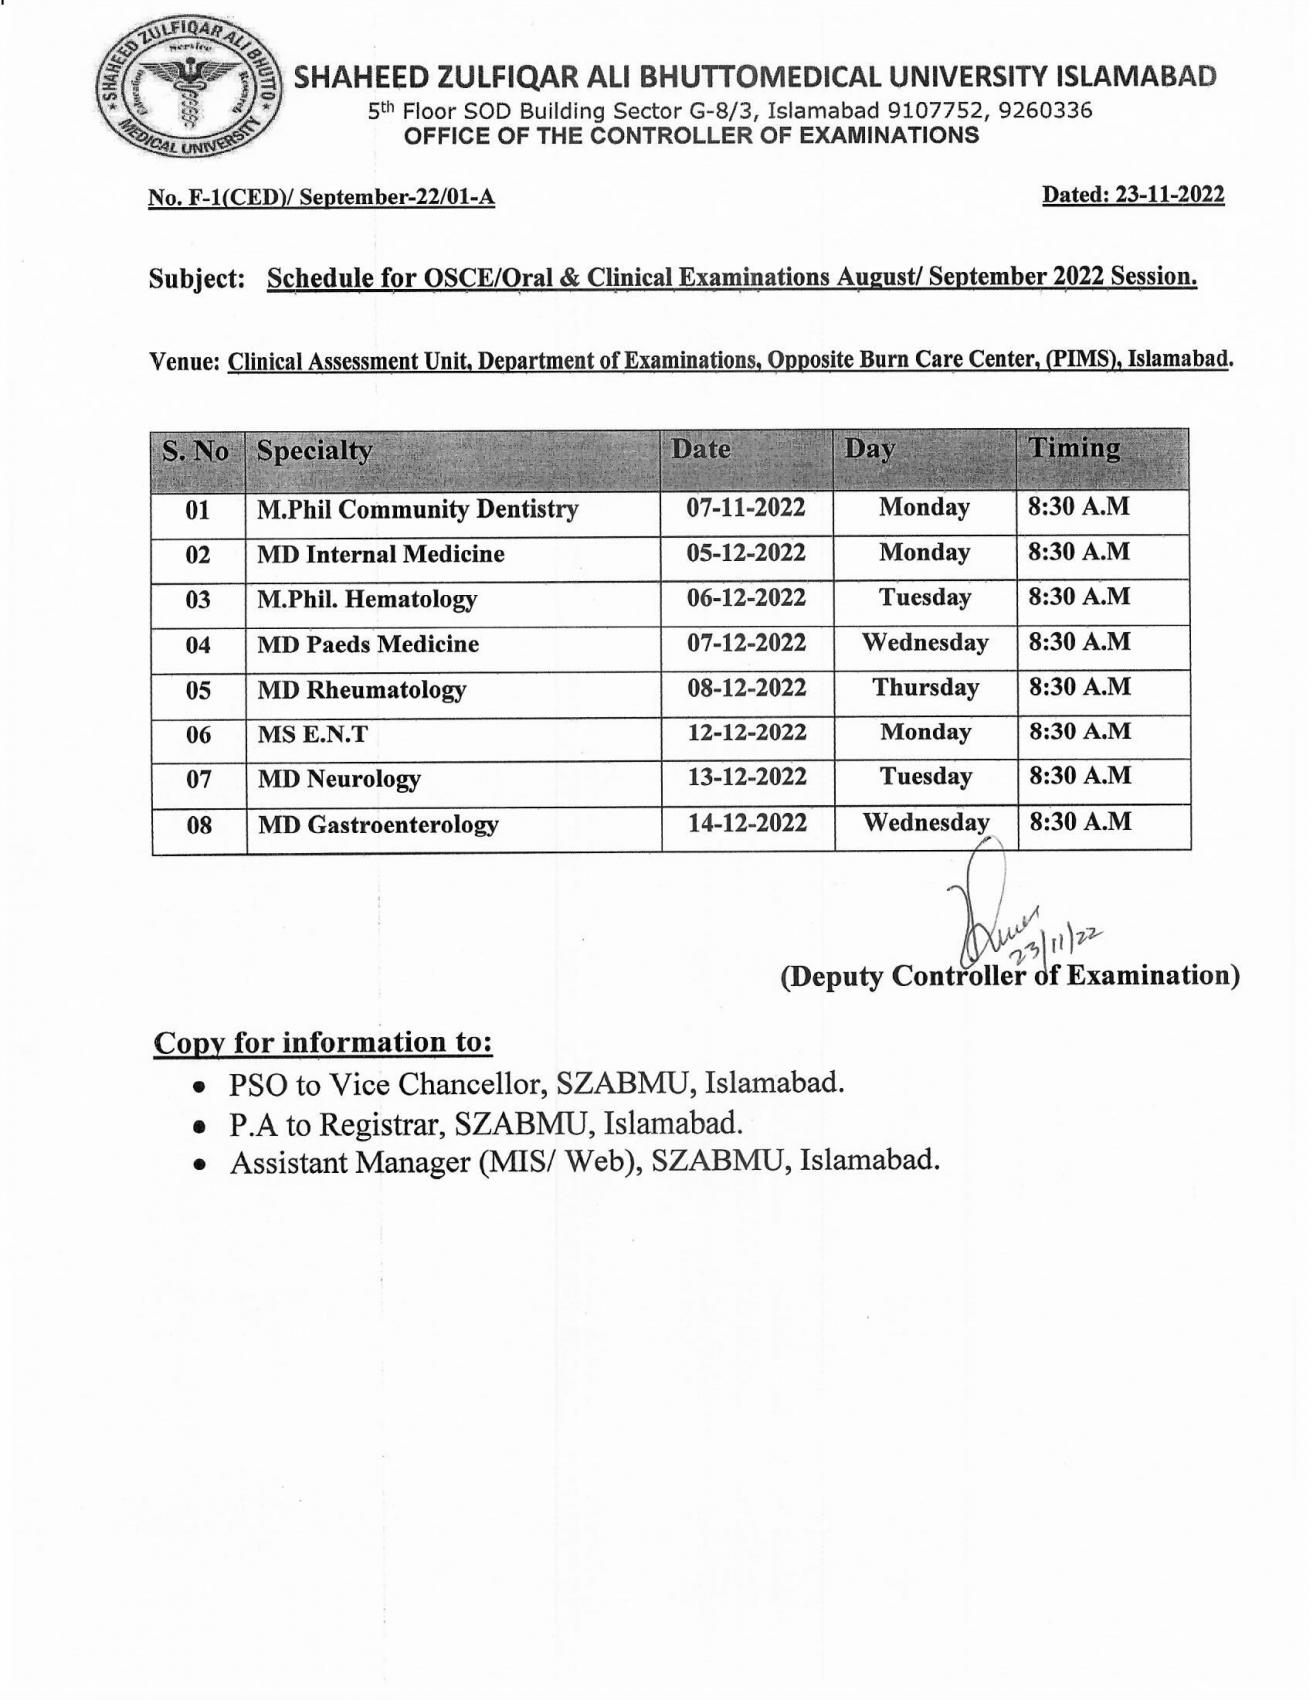 Schedule for OSCE/Oral & Clinical Examinations August/September 2022 Session